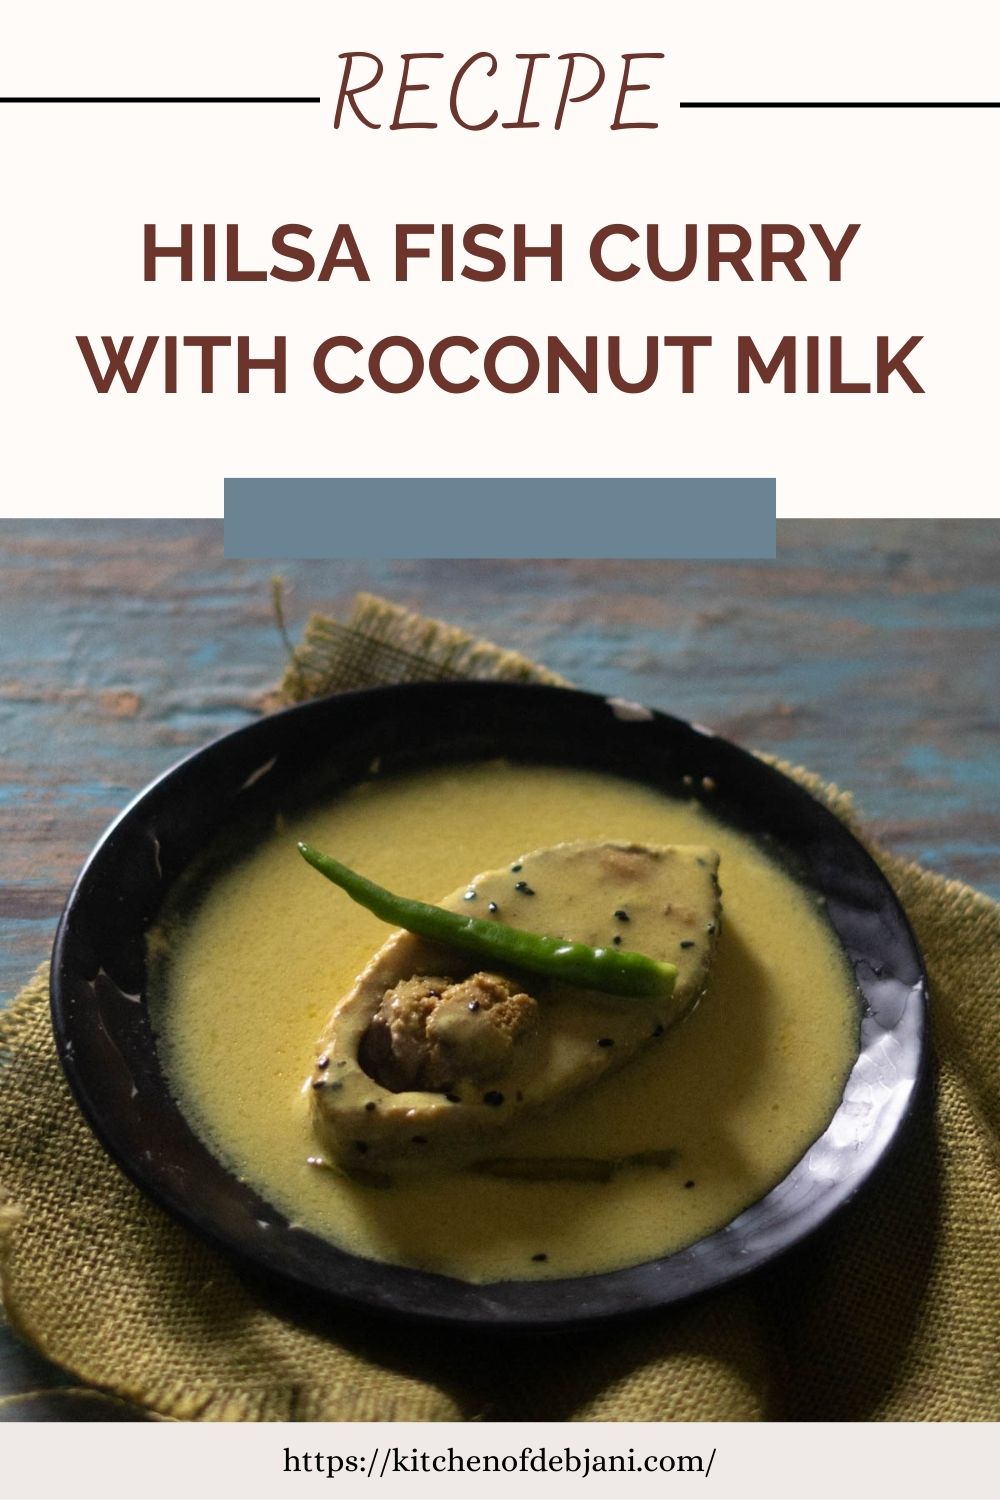 %Hilsa Fish Curry with Coconut Milk recipe Food Pinterest Pin